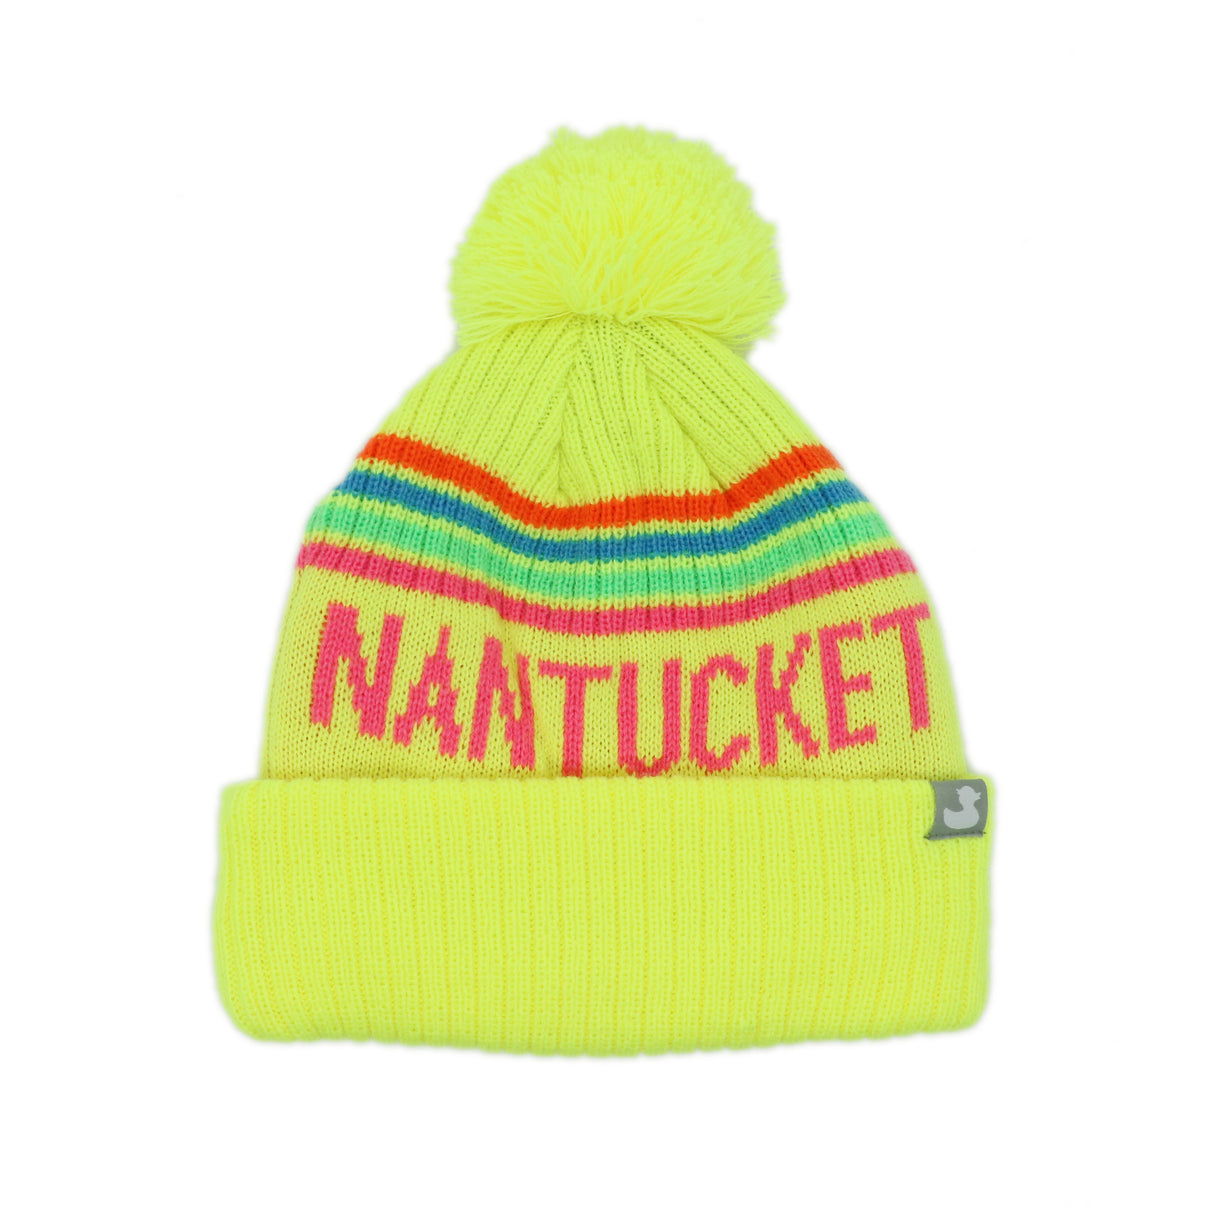 2024 Madison: Nantucket Winter Hat (Neon Yellow with Stripes)